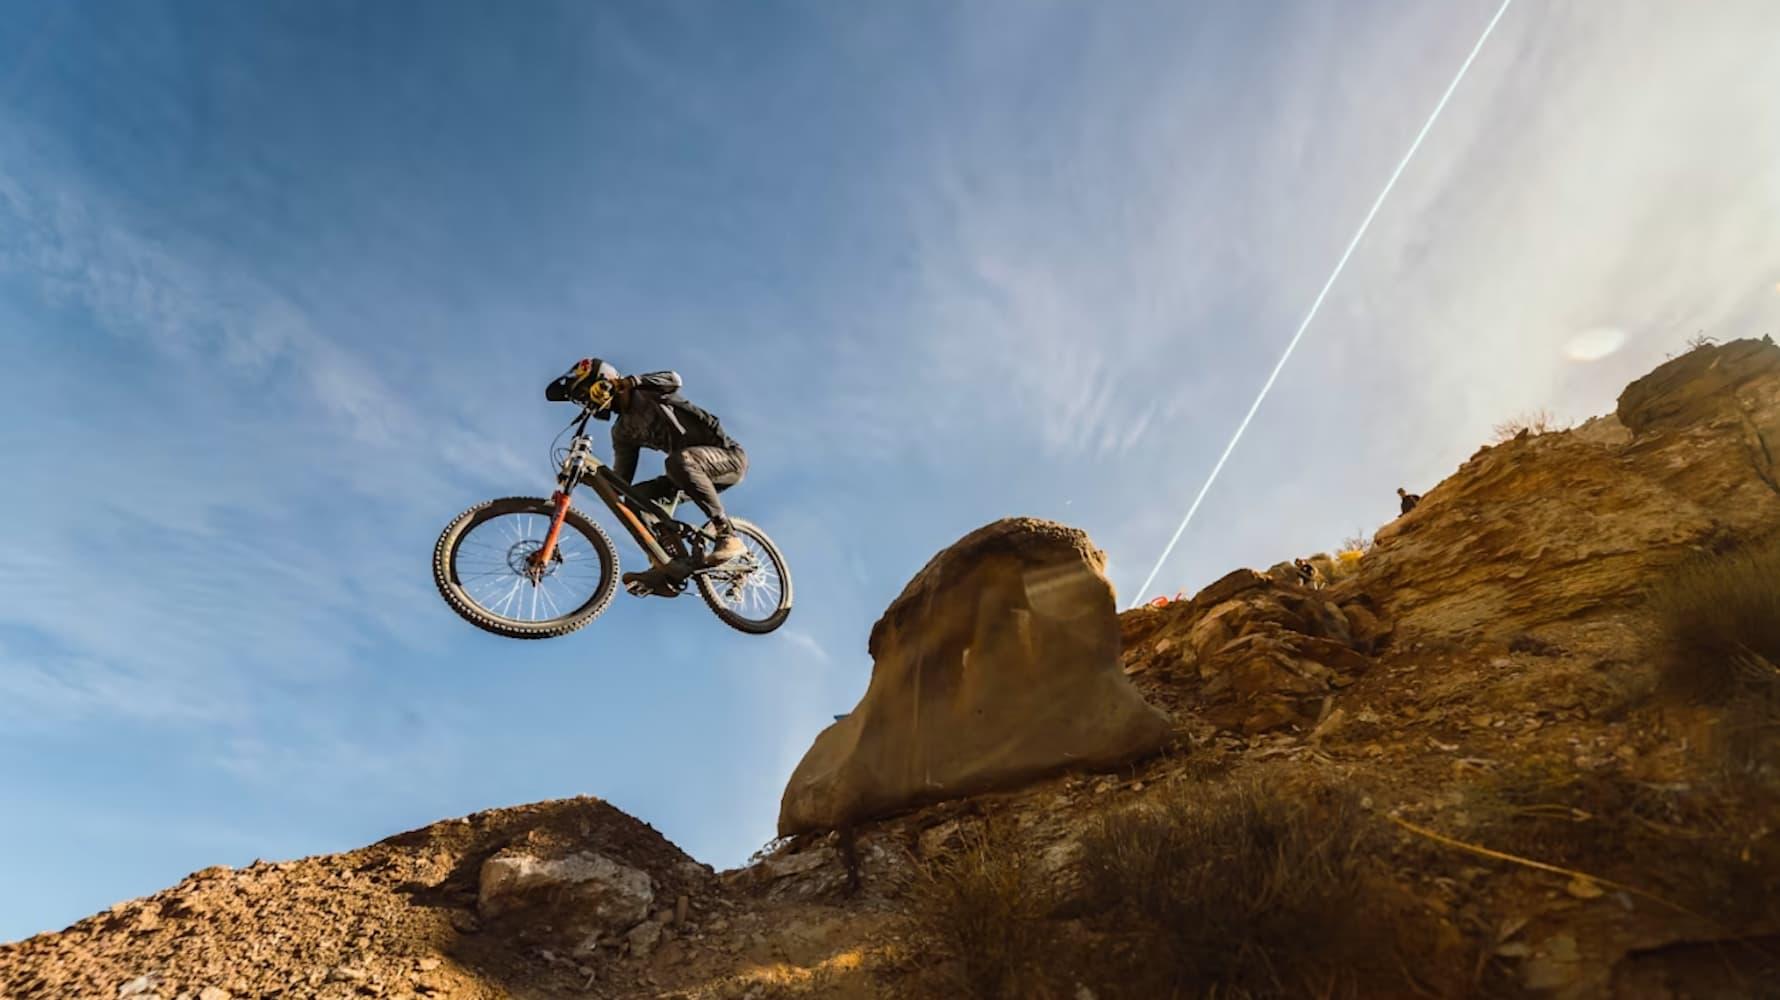 Red Bull Rampage 2012 backdrop